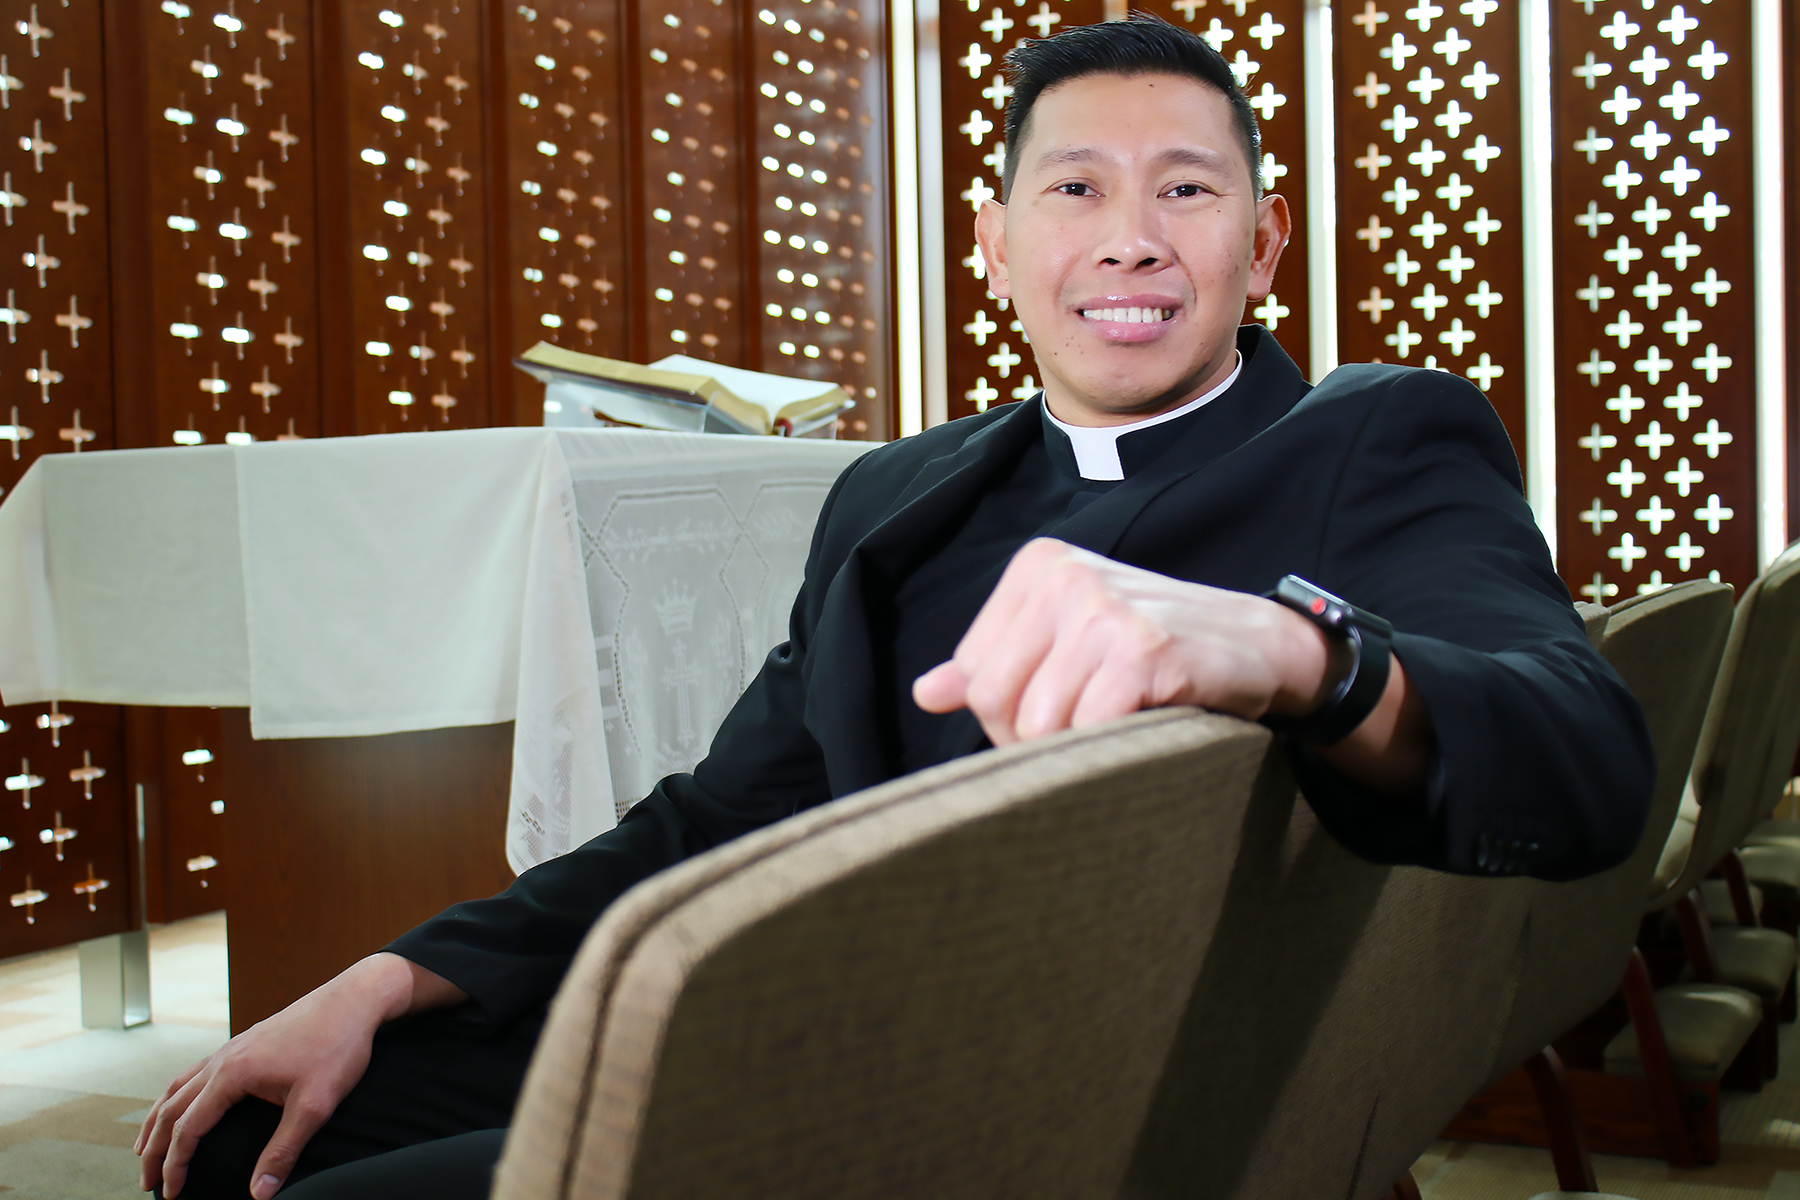 Father Ian Balinomo, FLP, at the front pew of the at the Chapel in the W.T. & Louise J. Moran Center